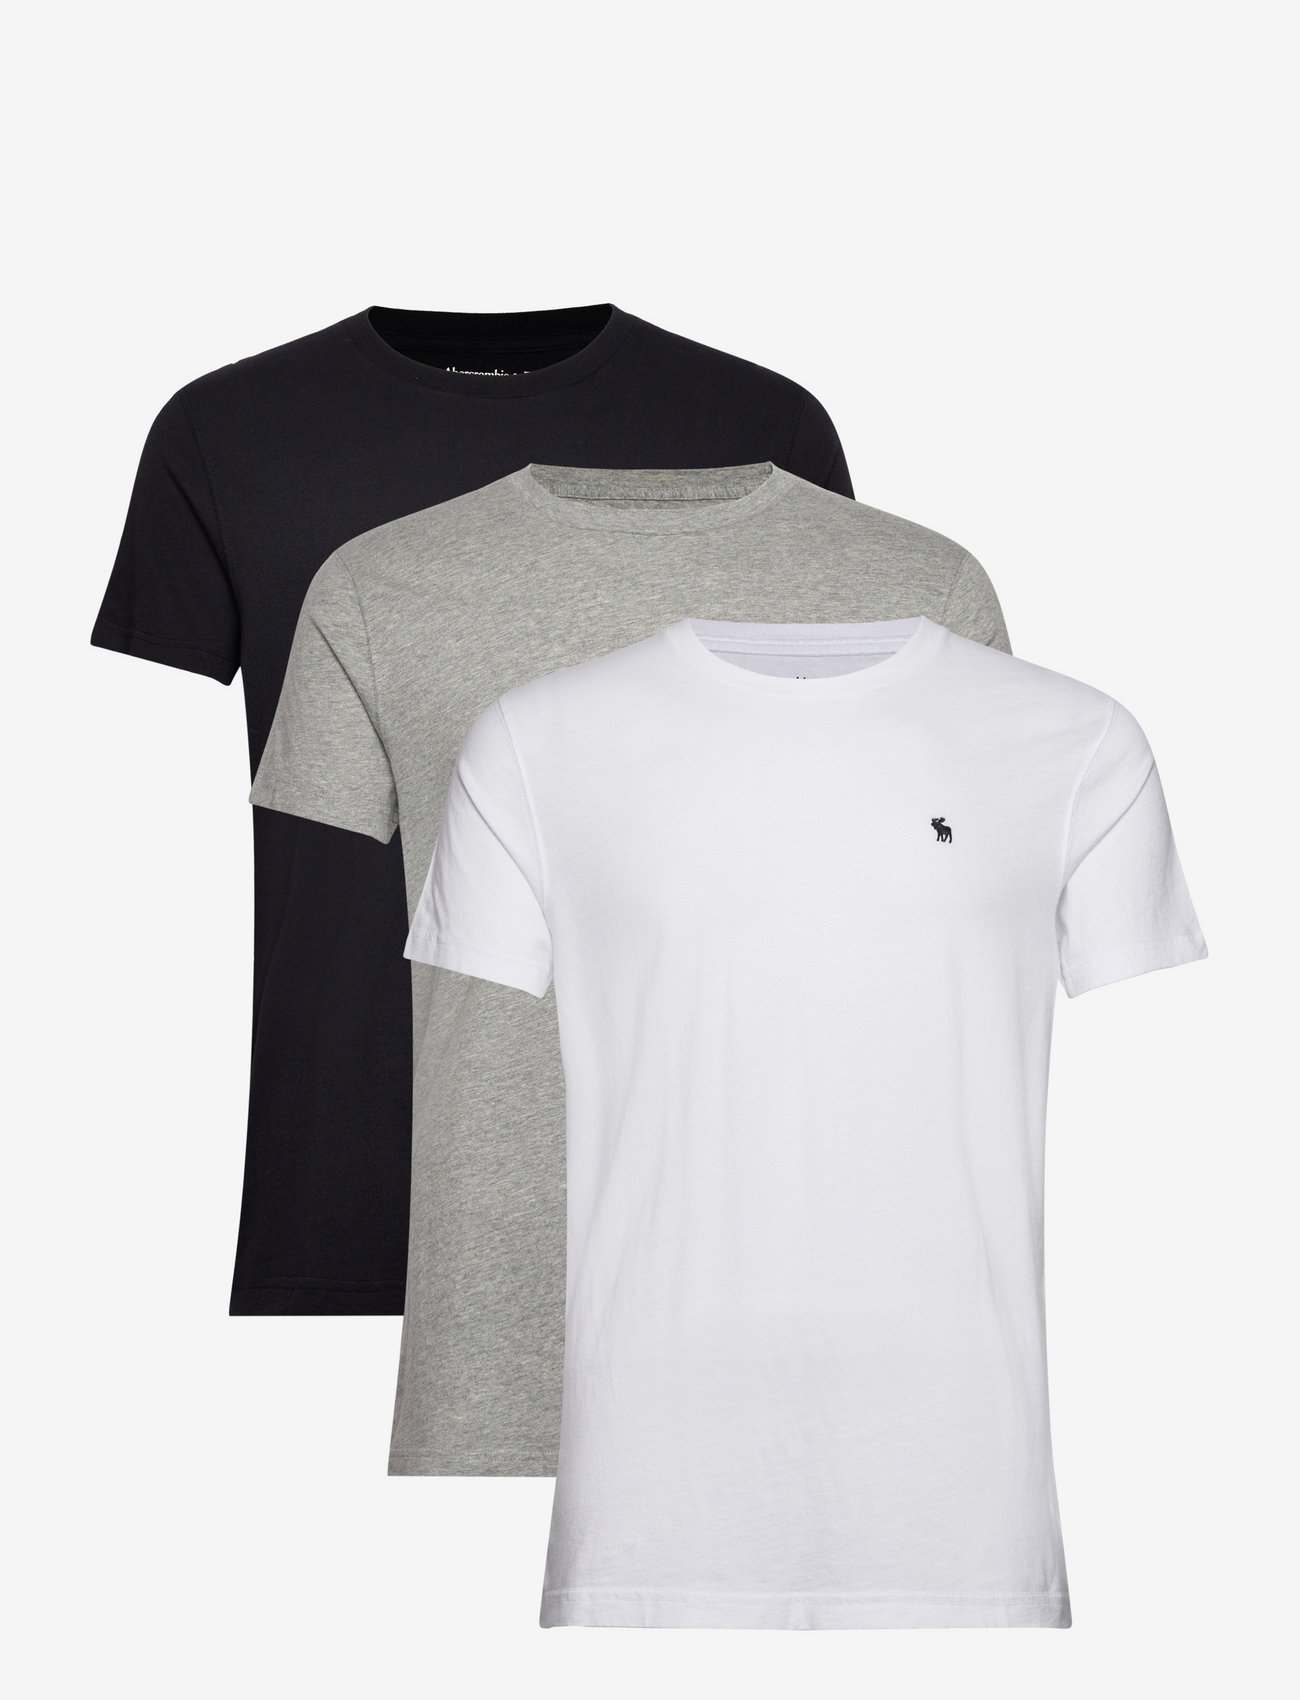 Abercrombie & Fitch - ANF MENS KNITS - t-shirts à manches courtes - white black grey - 0